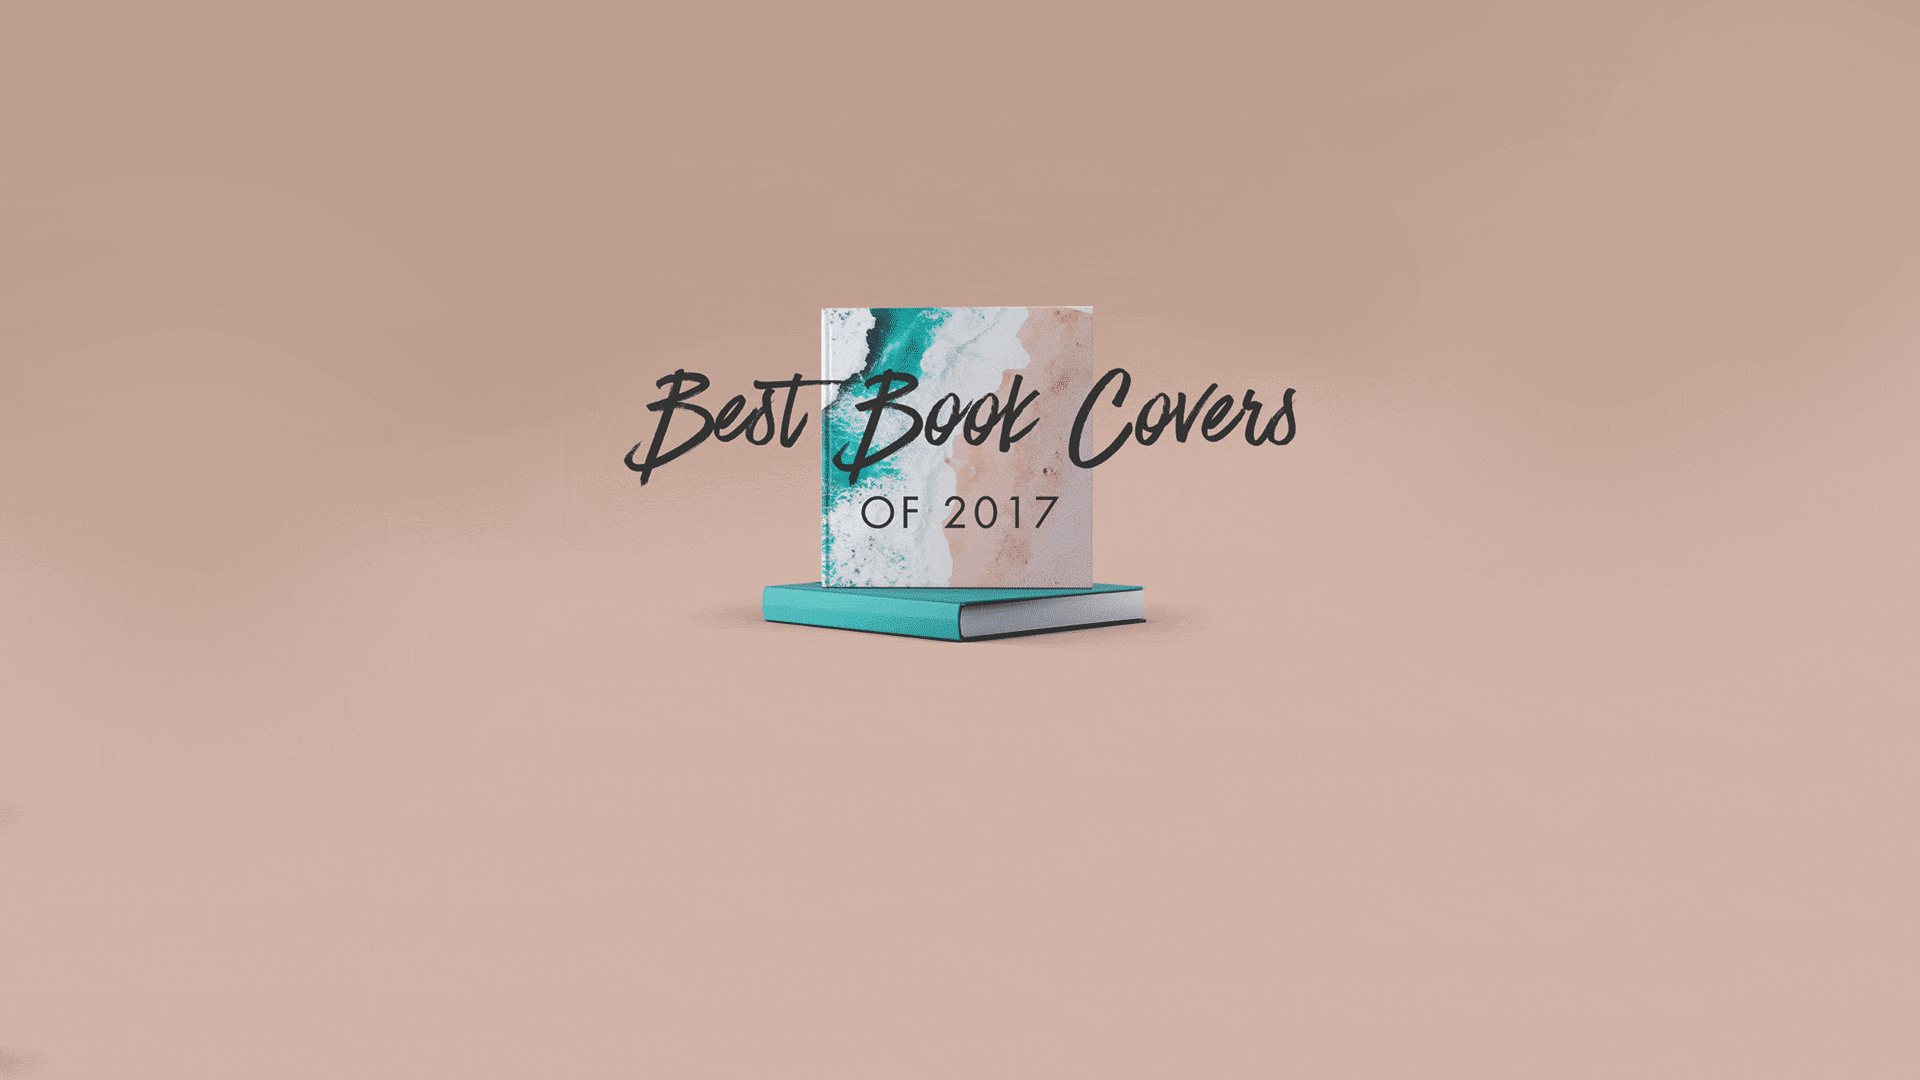 Best Book Covers of 2017